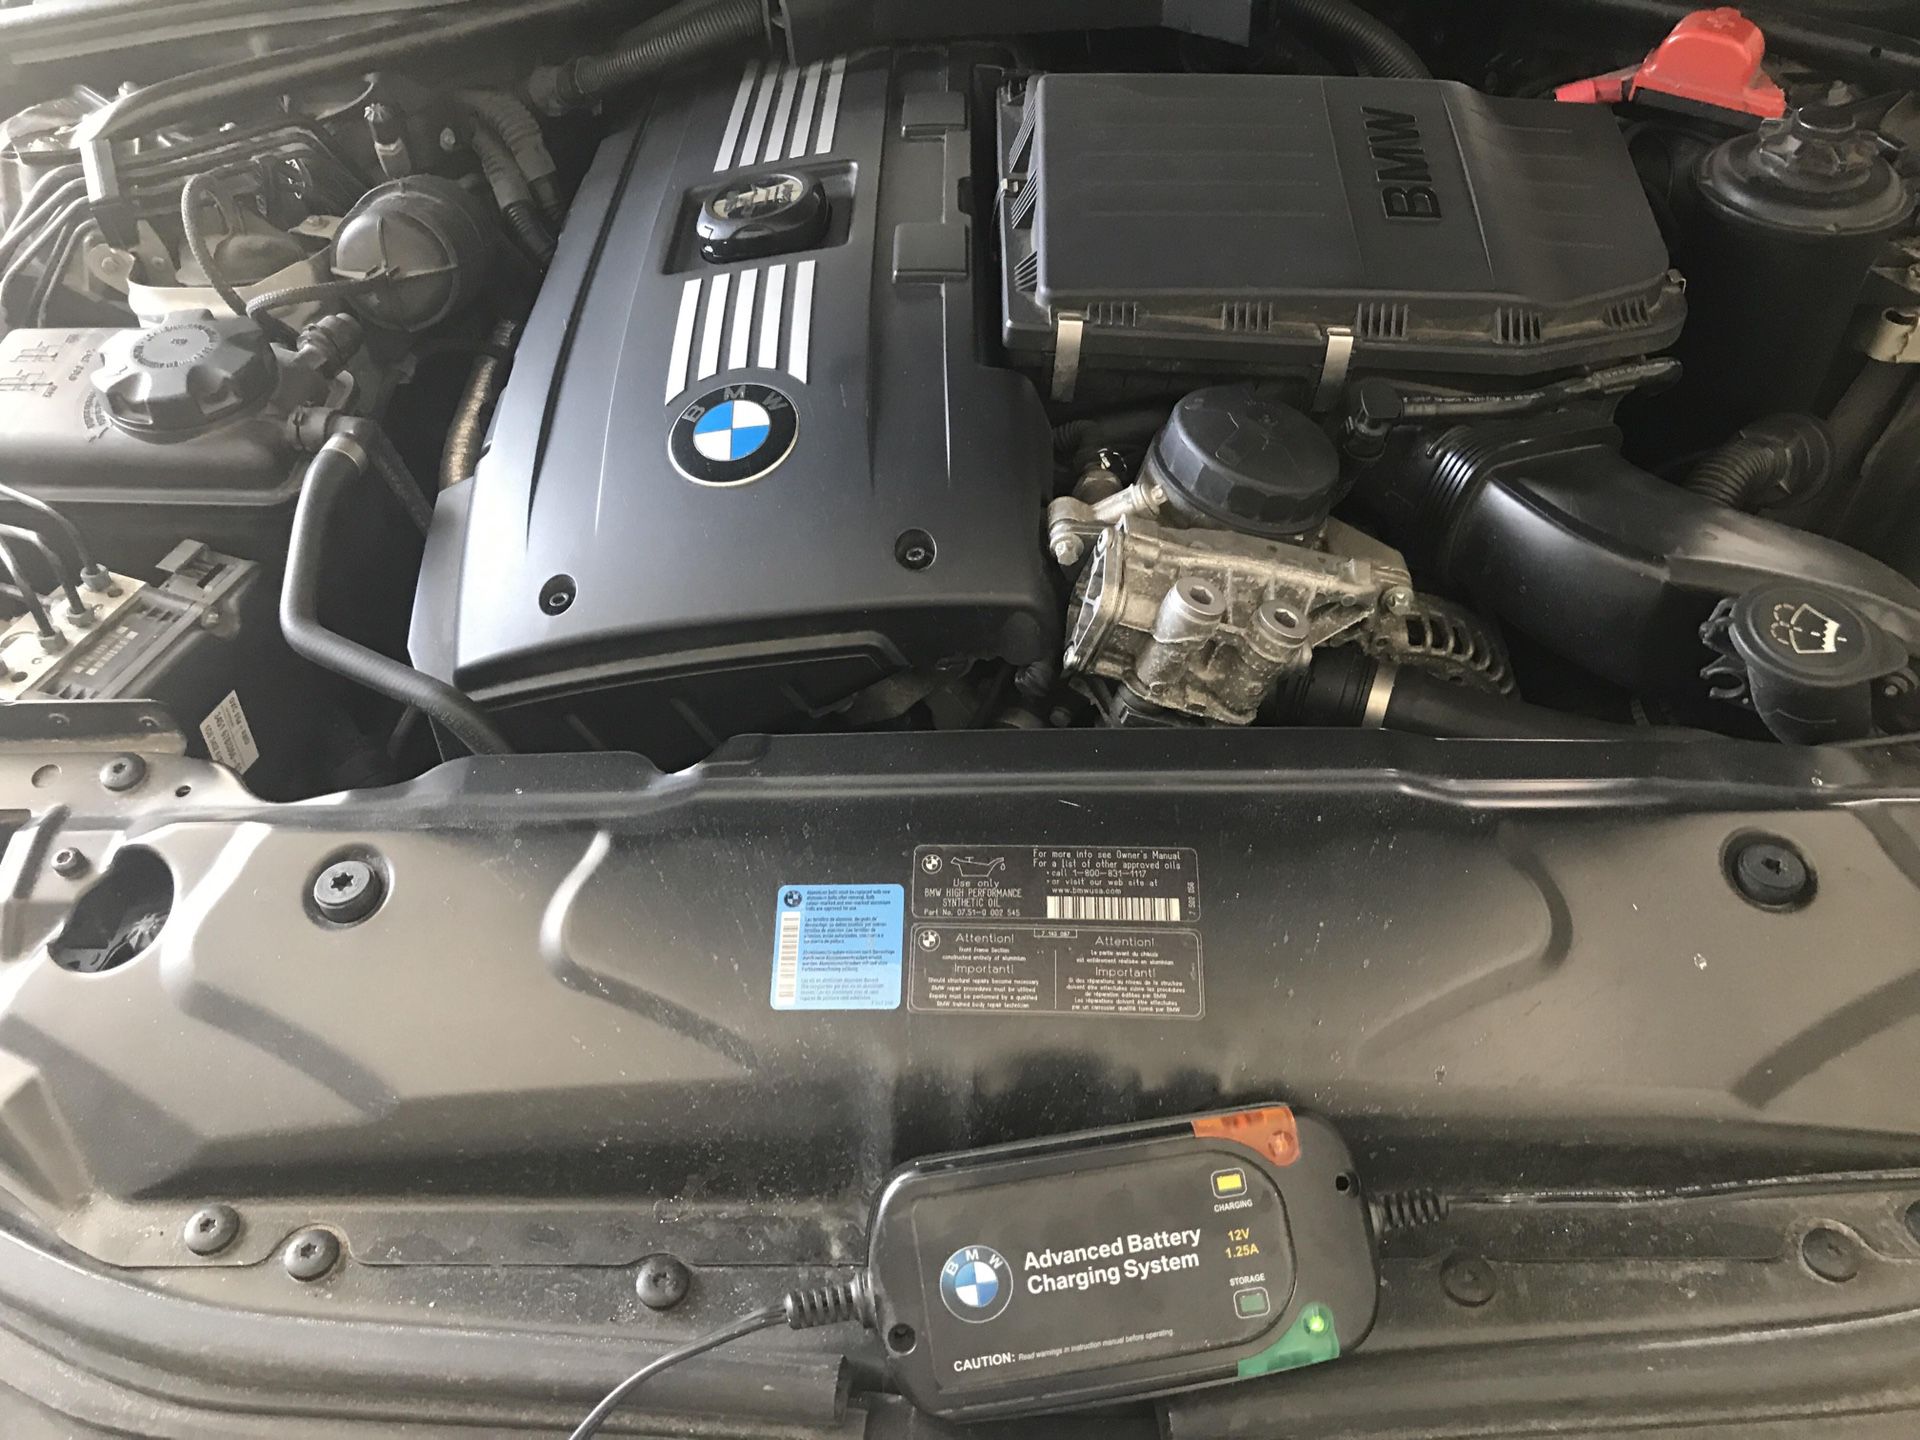 BMW n54 twinTurbo engine and other parts